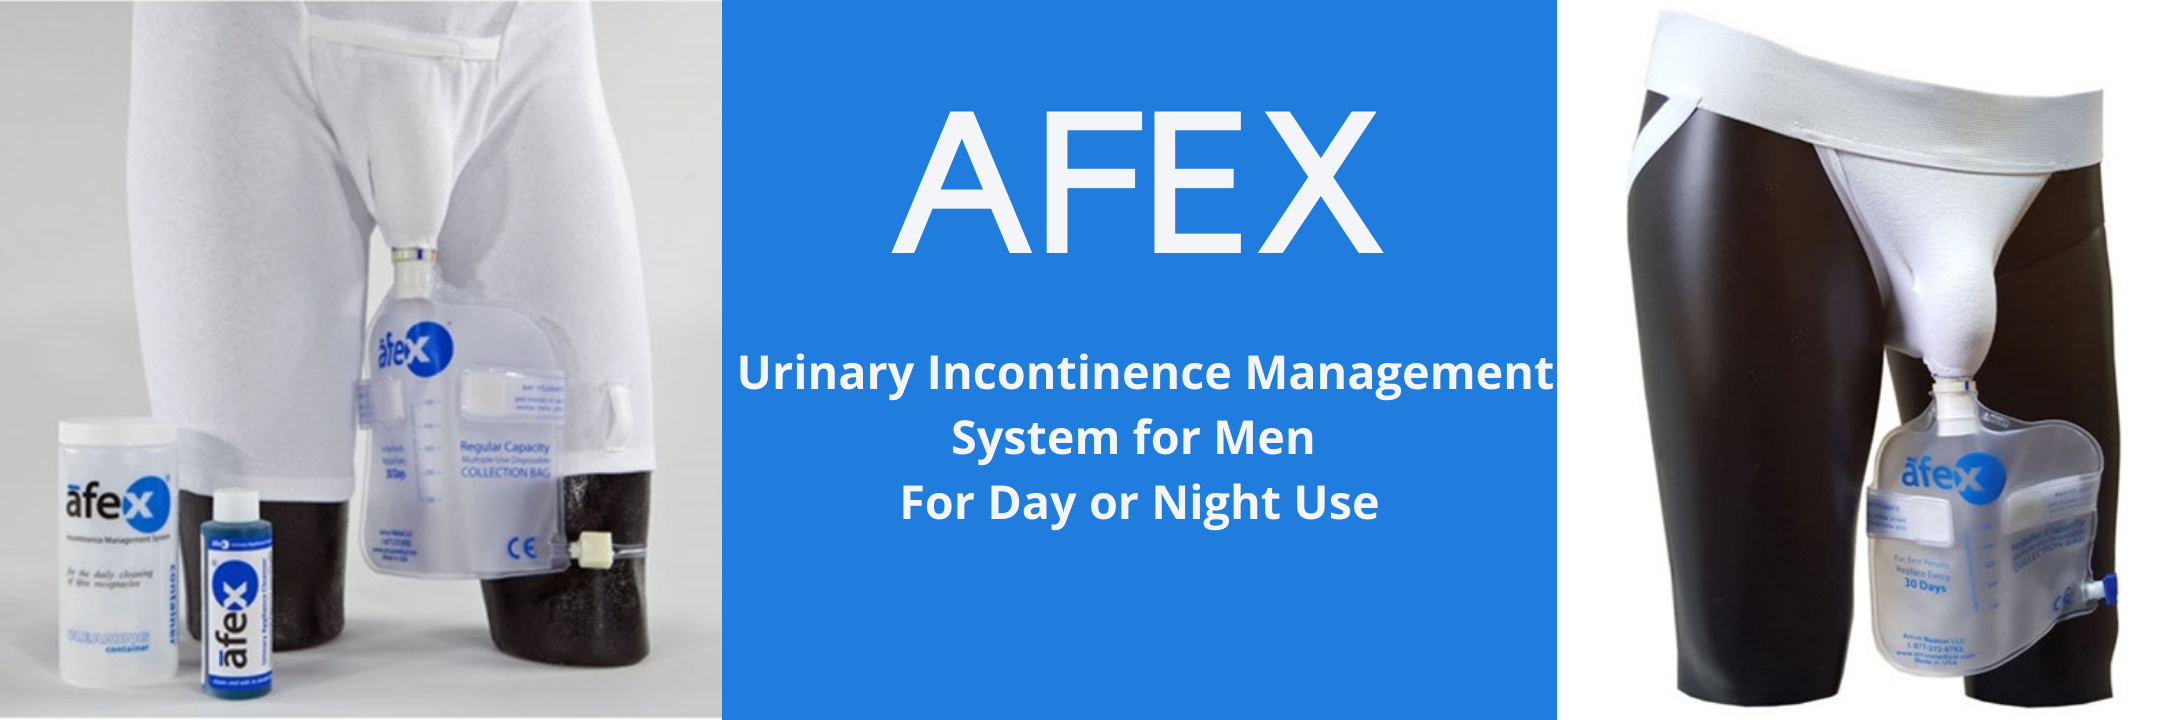 Afex urinary management for men